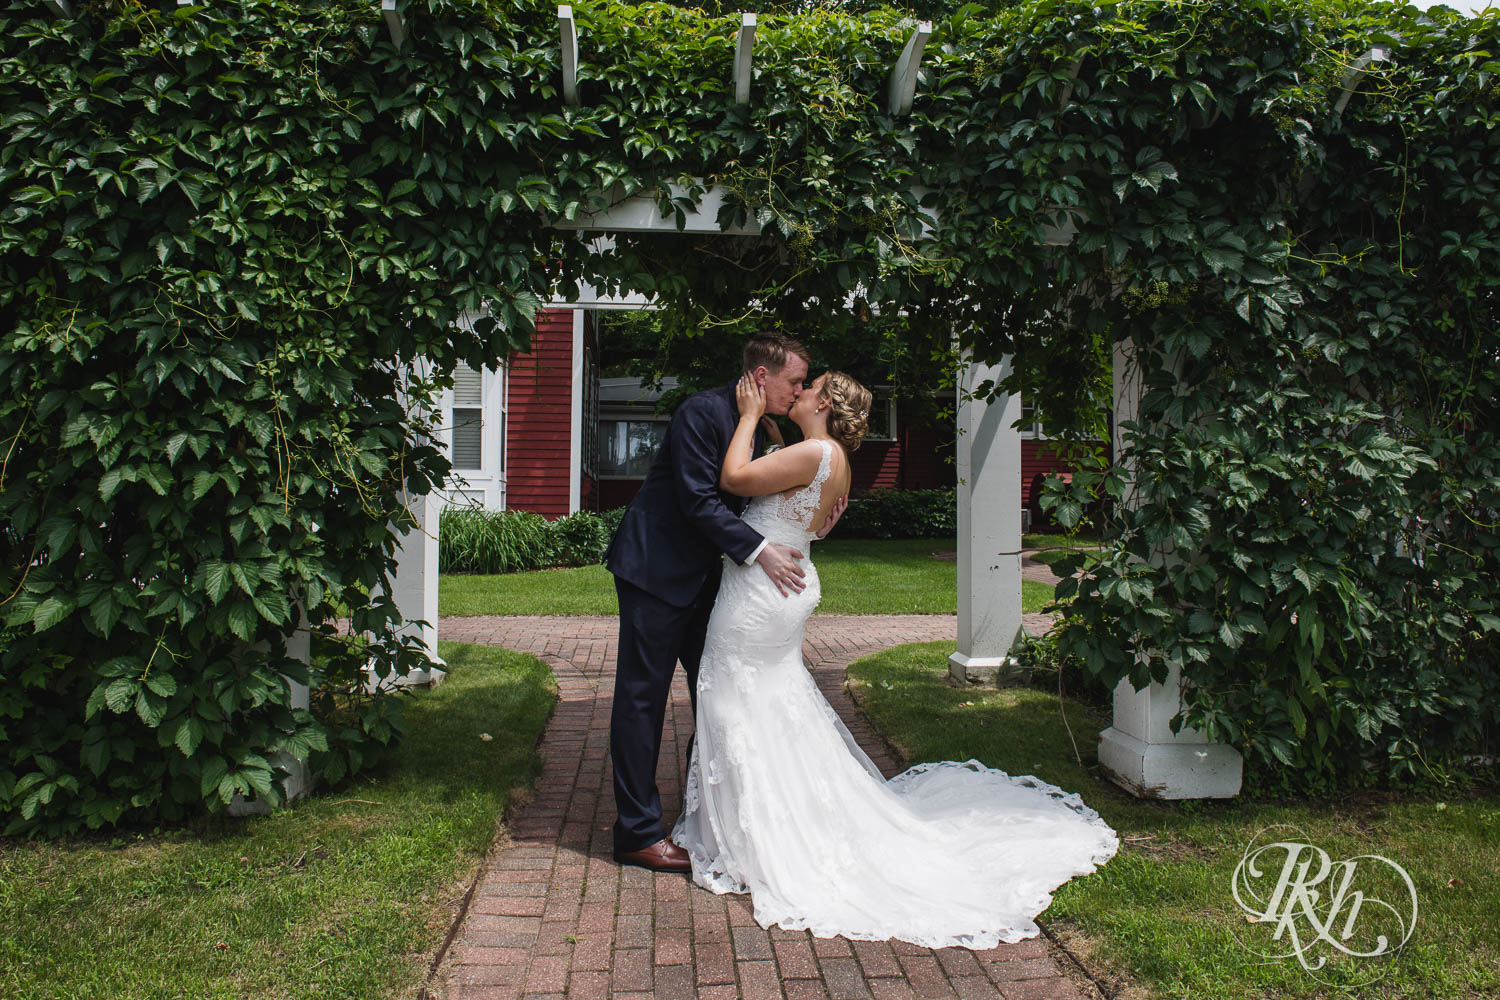 Bride and groom kiss on wedding day at Earle Brown Heritage Center in Brooklyn Center, Minnesota.